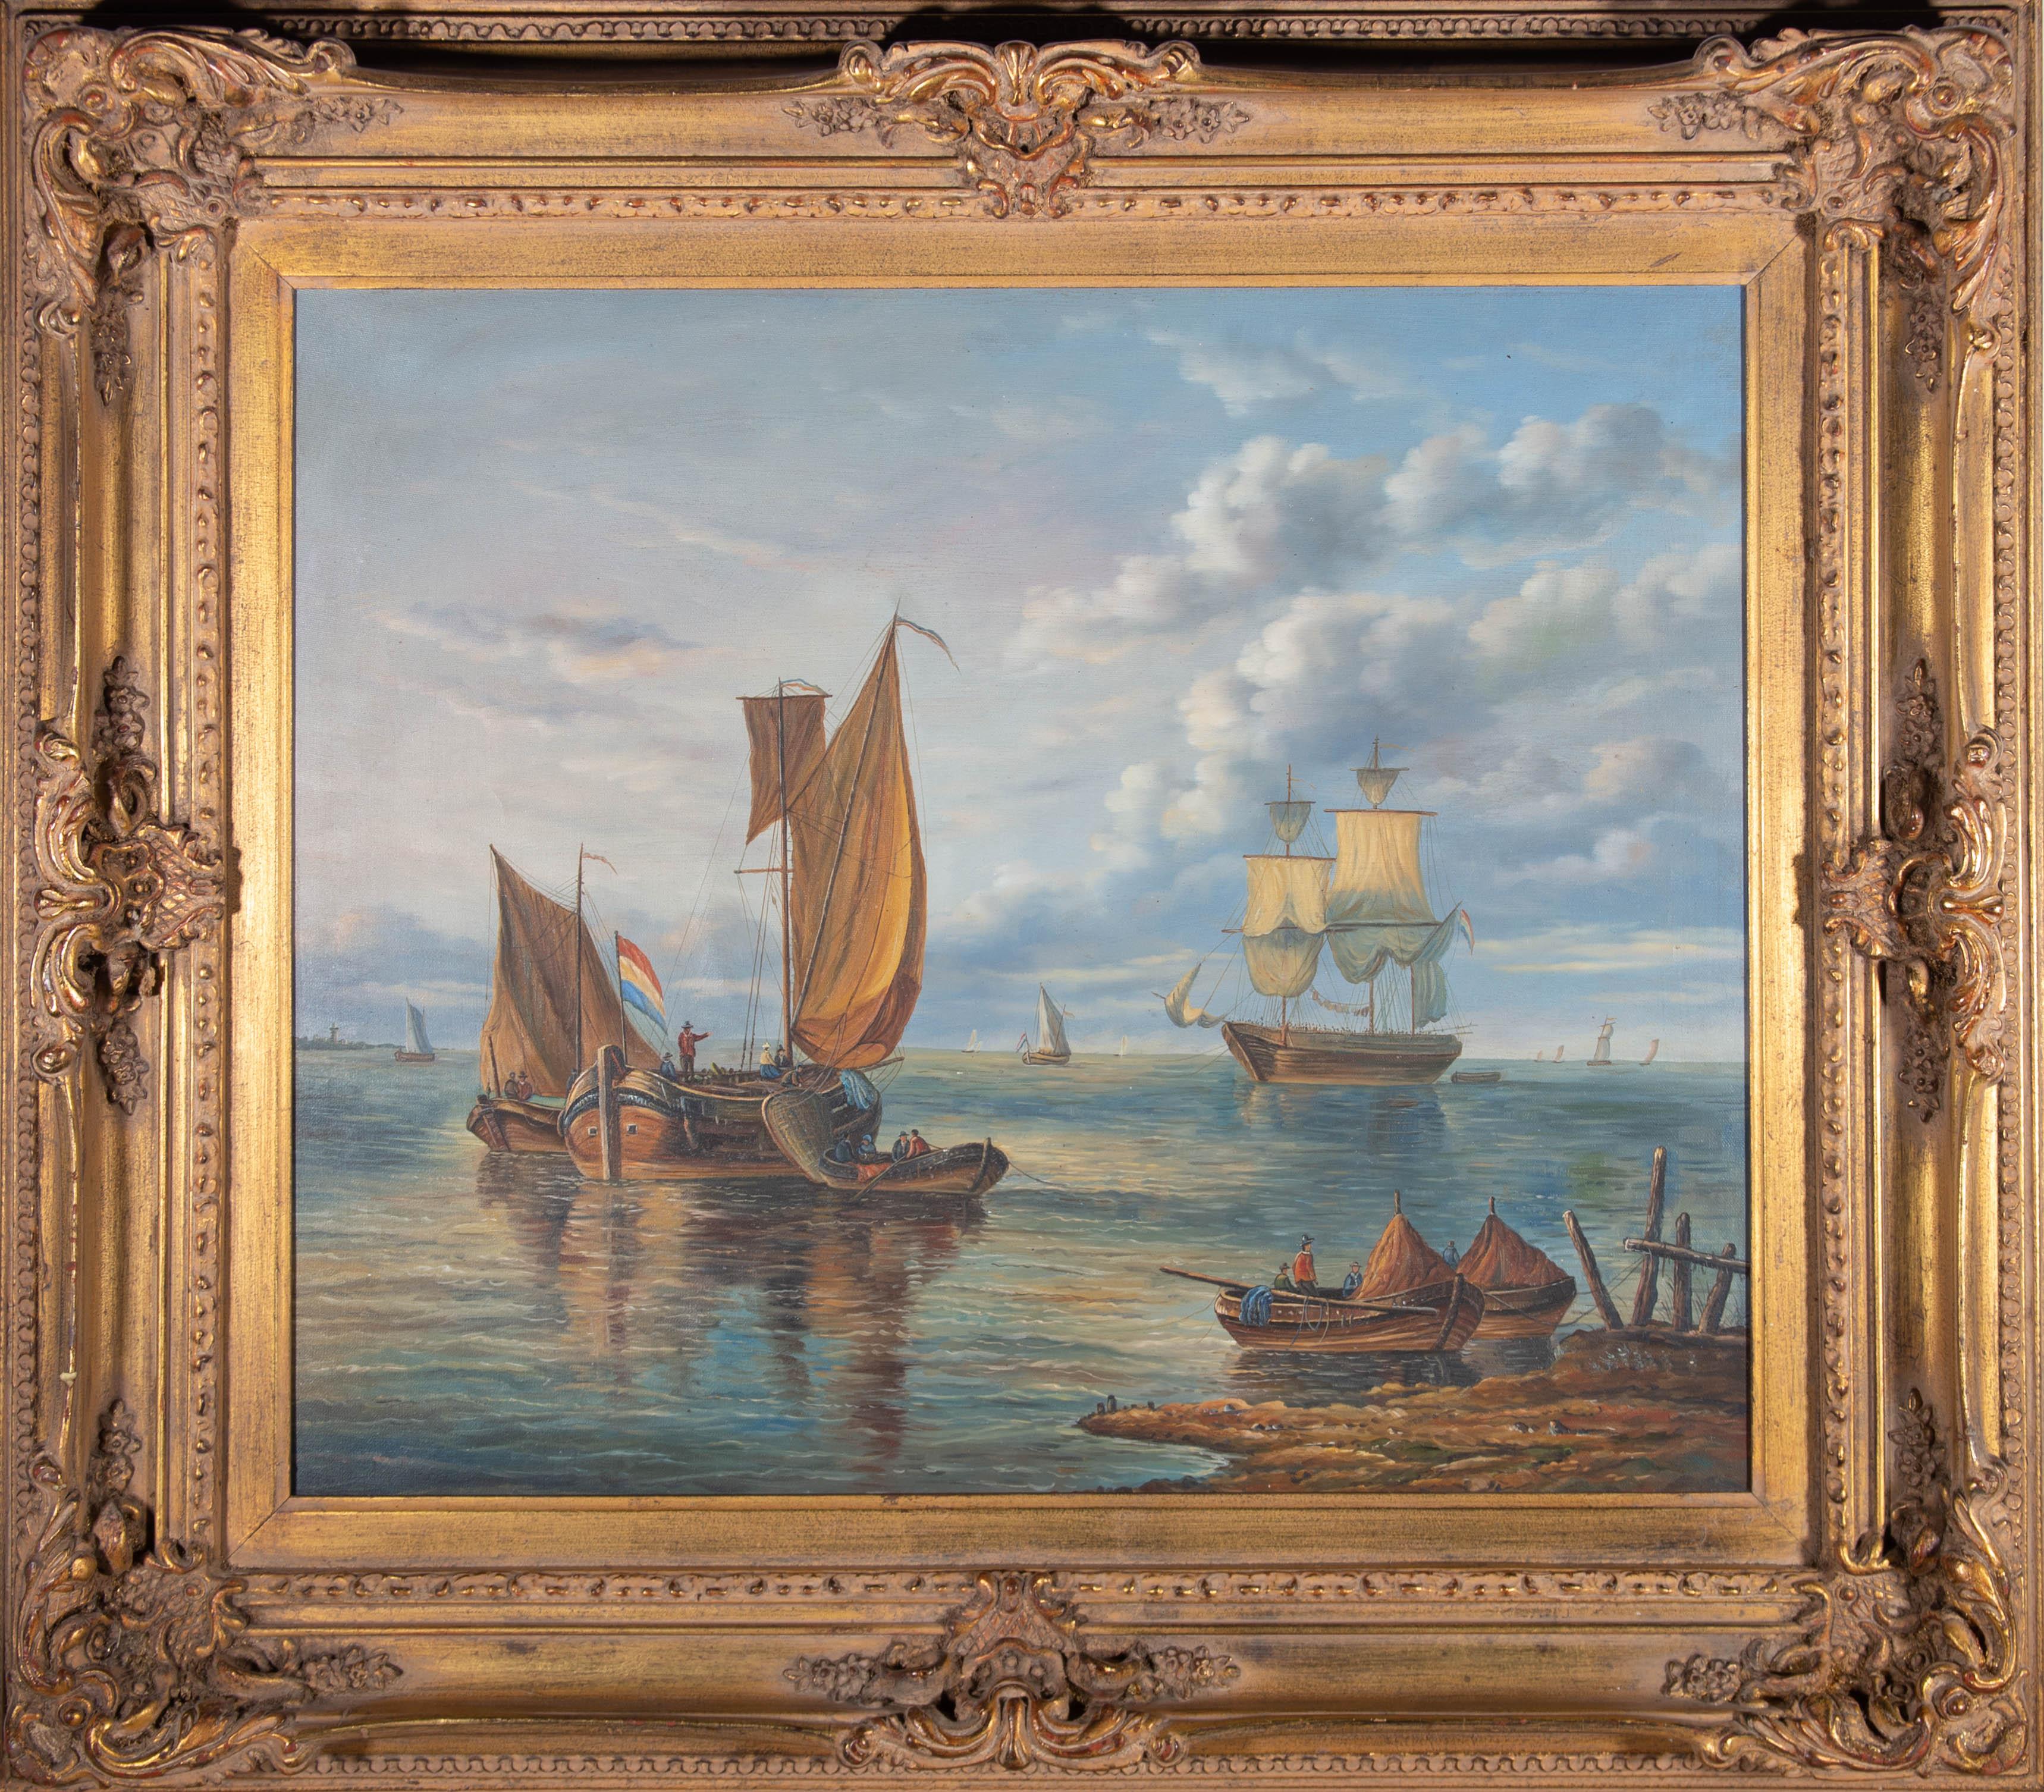 Unknown Figurative Painting - 20th Century Oil - Dutch Barges and a Brig Schooner